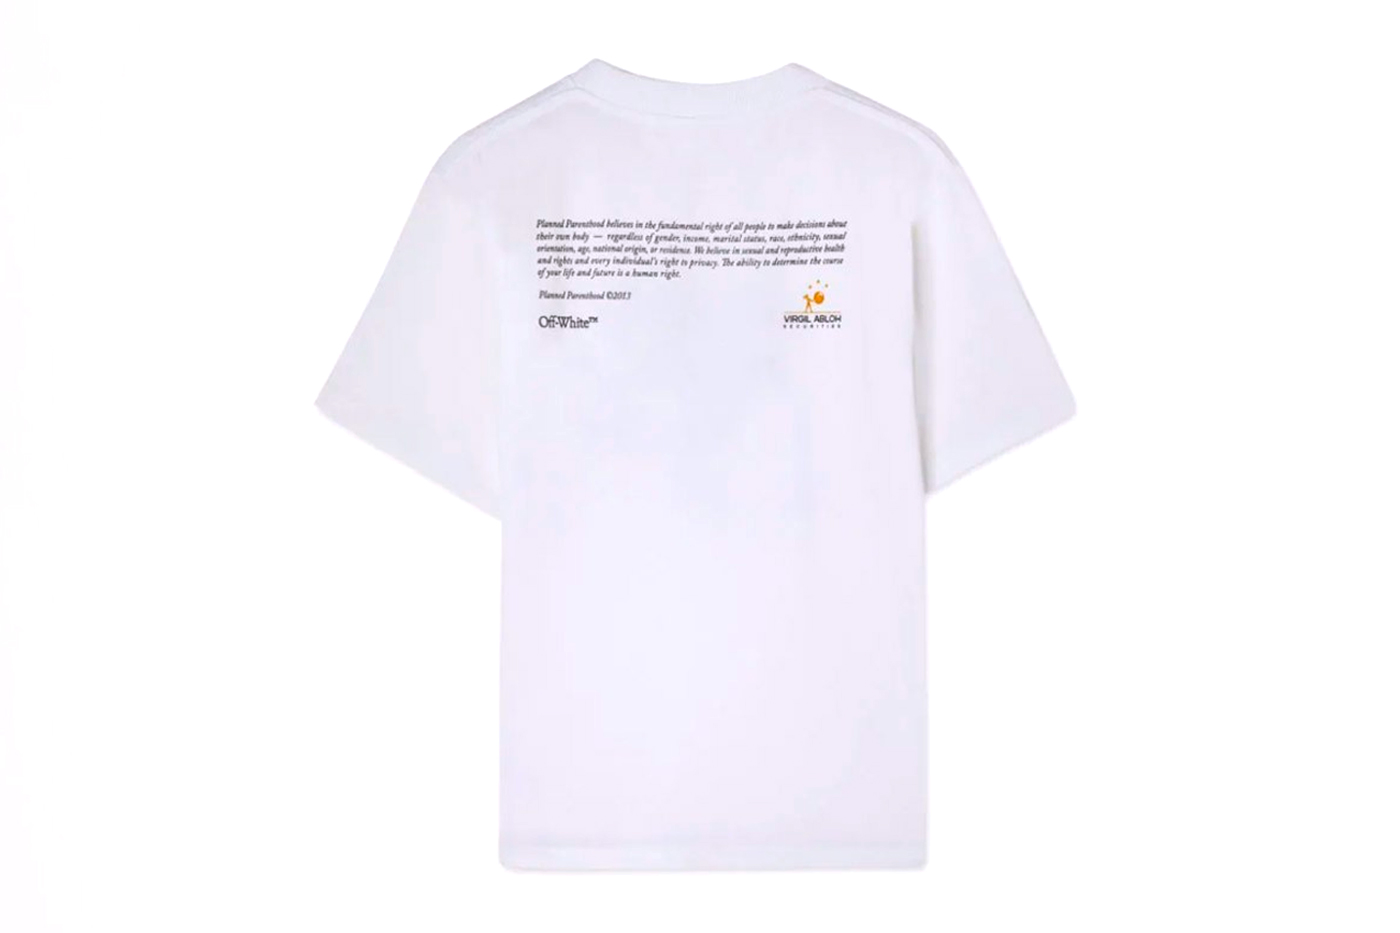 Off-White™ Re-Releases the Virgil Abloh and Jenny Holzer T-Shirt to Benefit Planned Parenthood